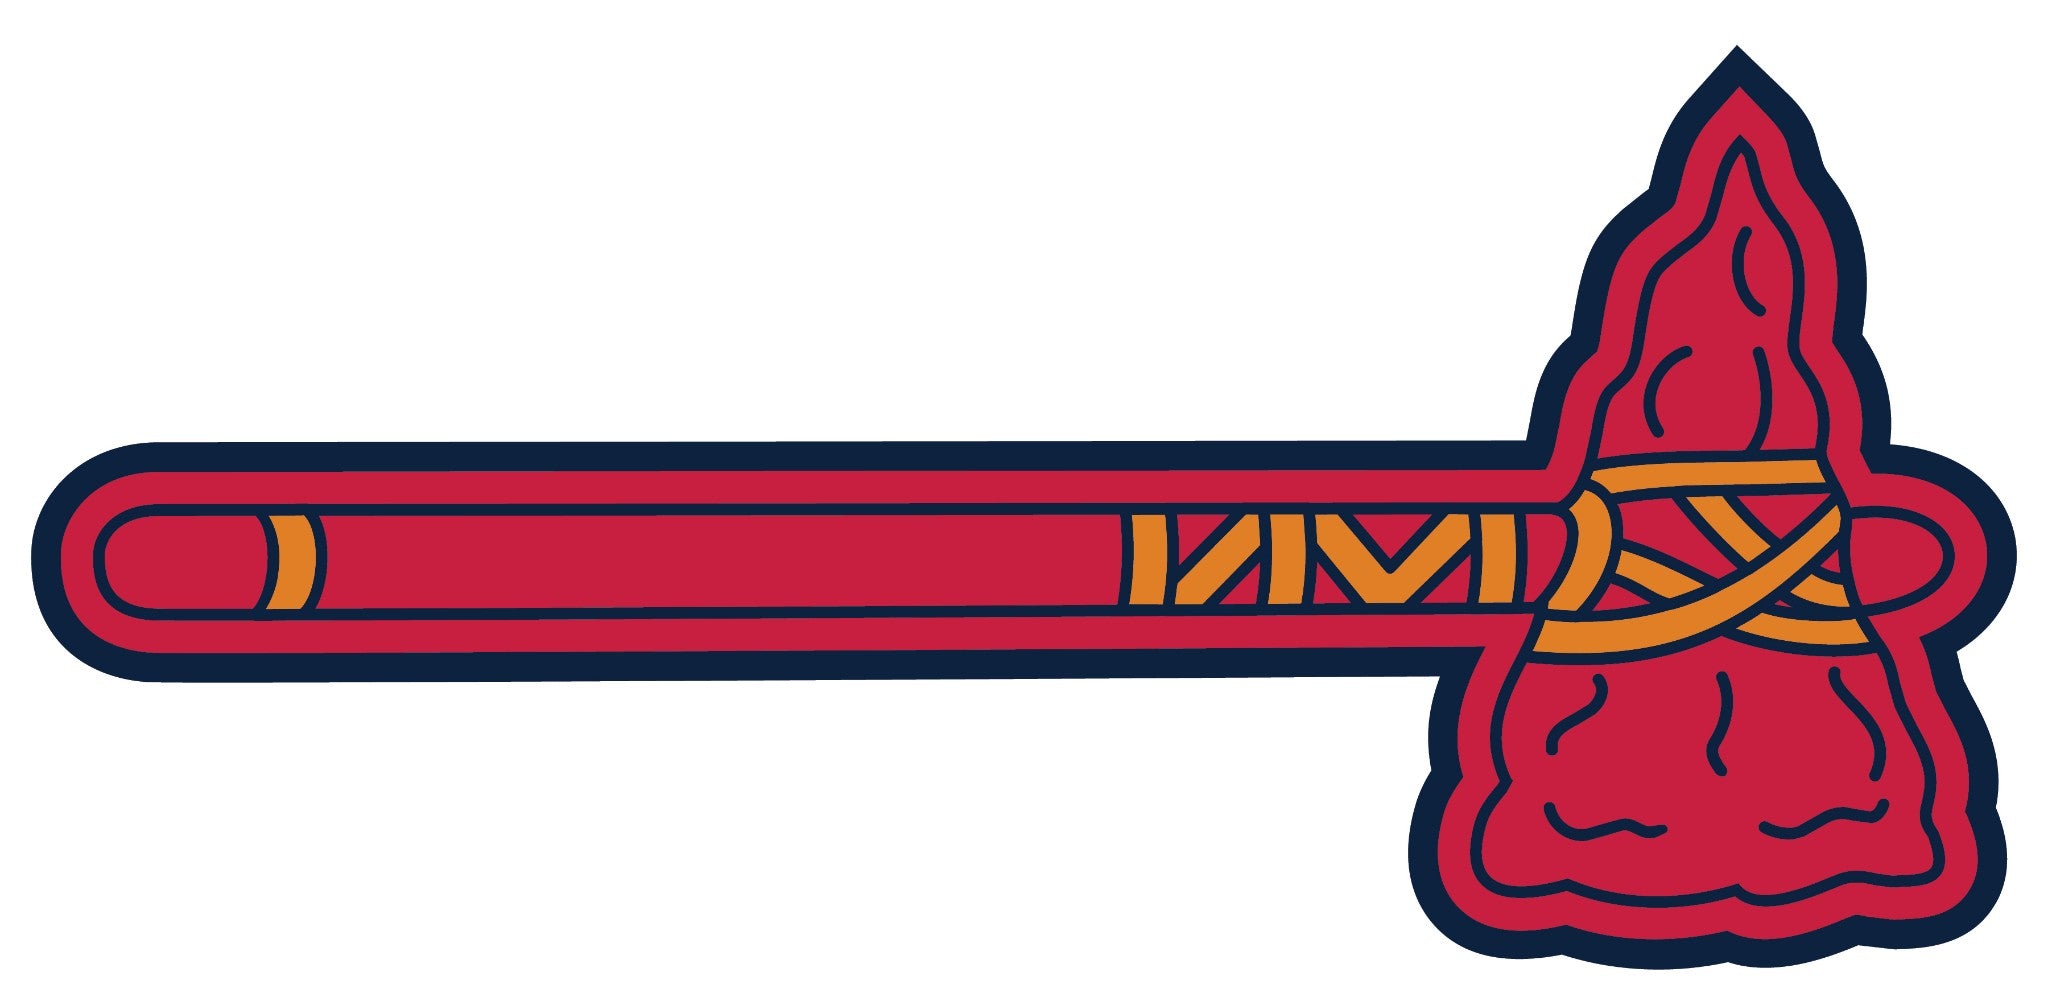 424 Braves Tomahawk Royalty-Free Images, Stock Photos & Pictures